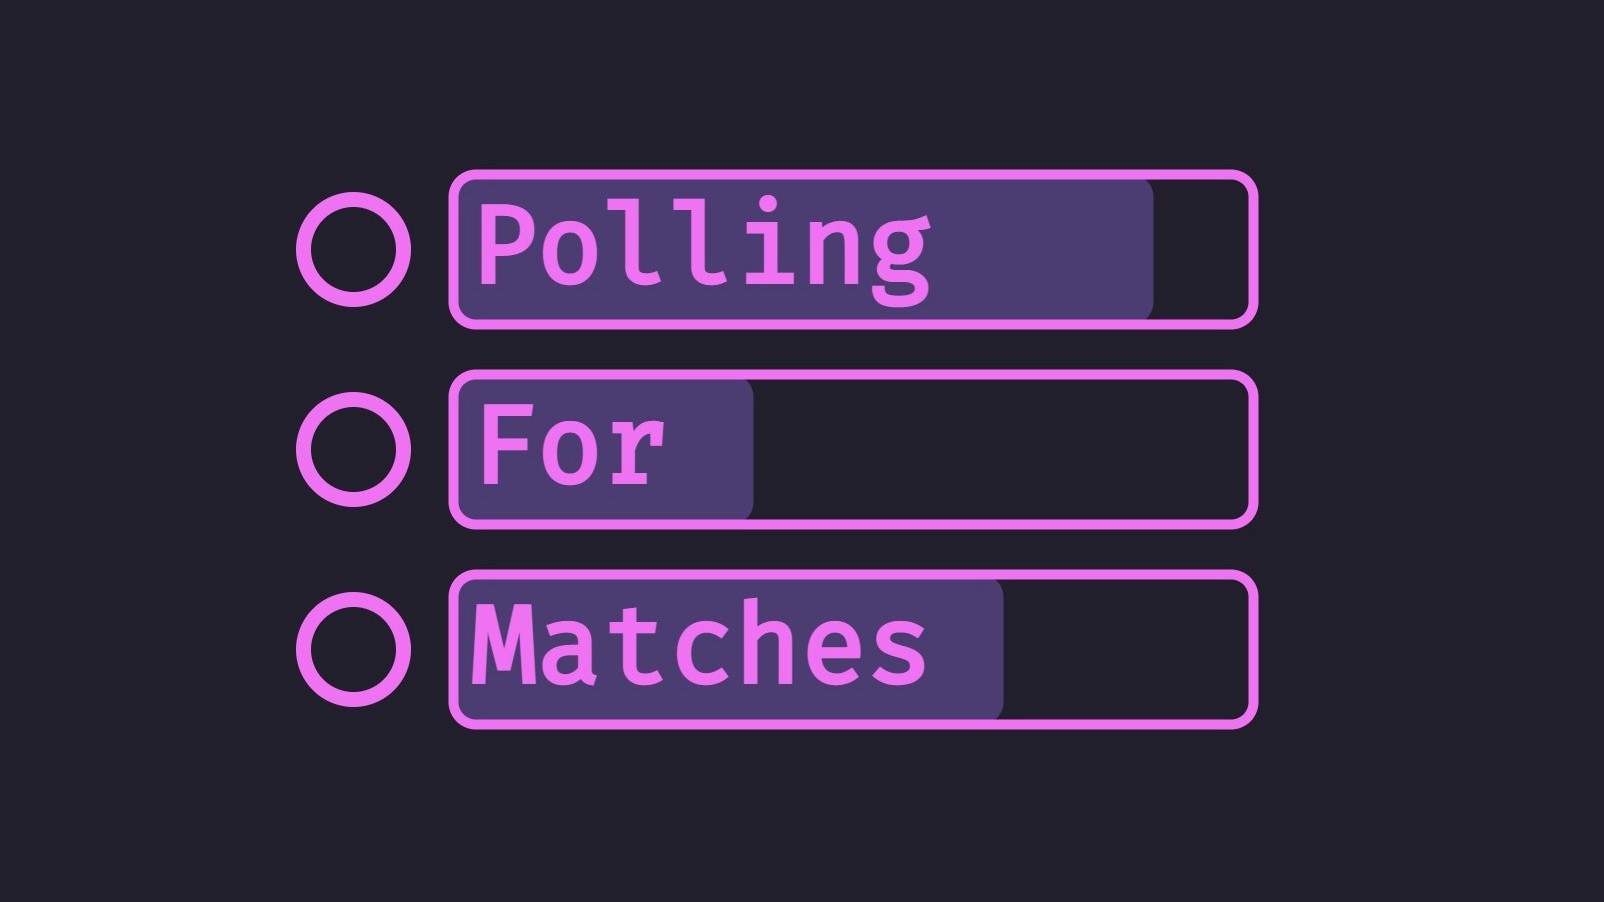 Polling for Matches